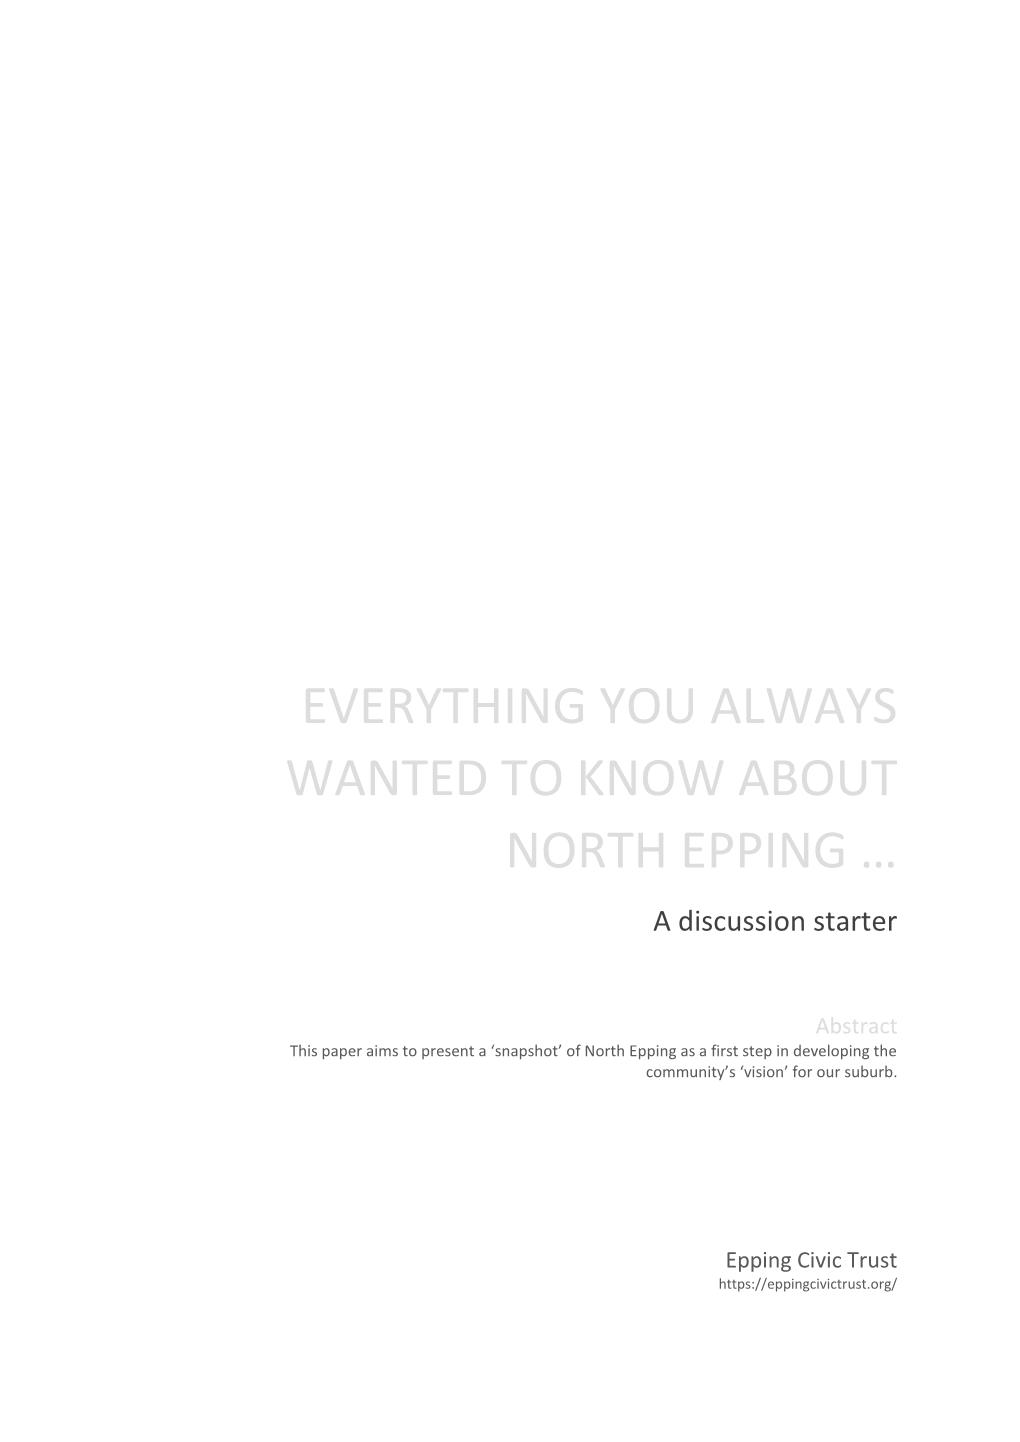 EVERYTHING YOU ALWAYS WANTED to KNOW ABOUT NORTH EPPING … a Discussion Starter